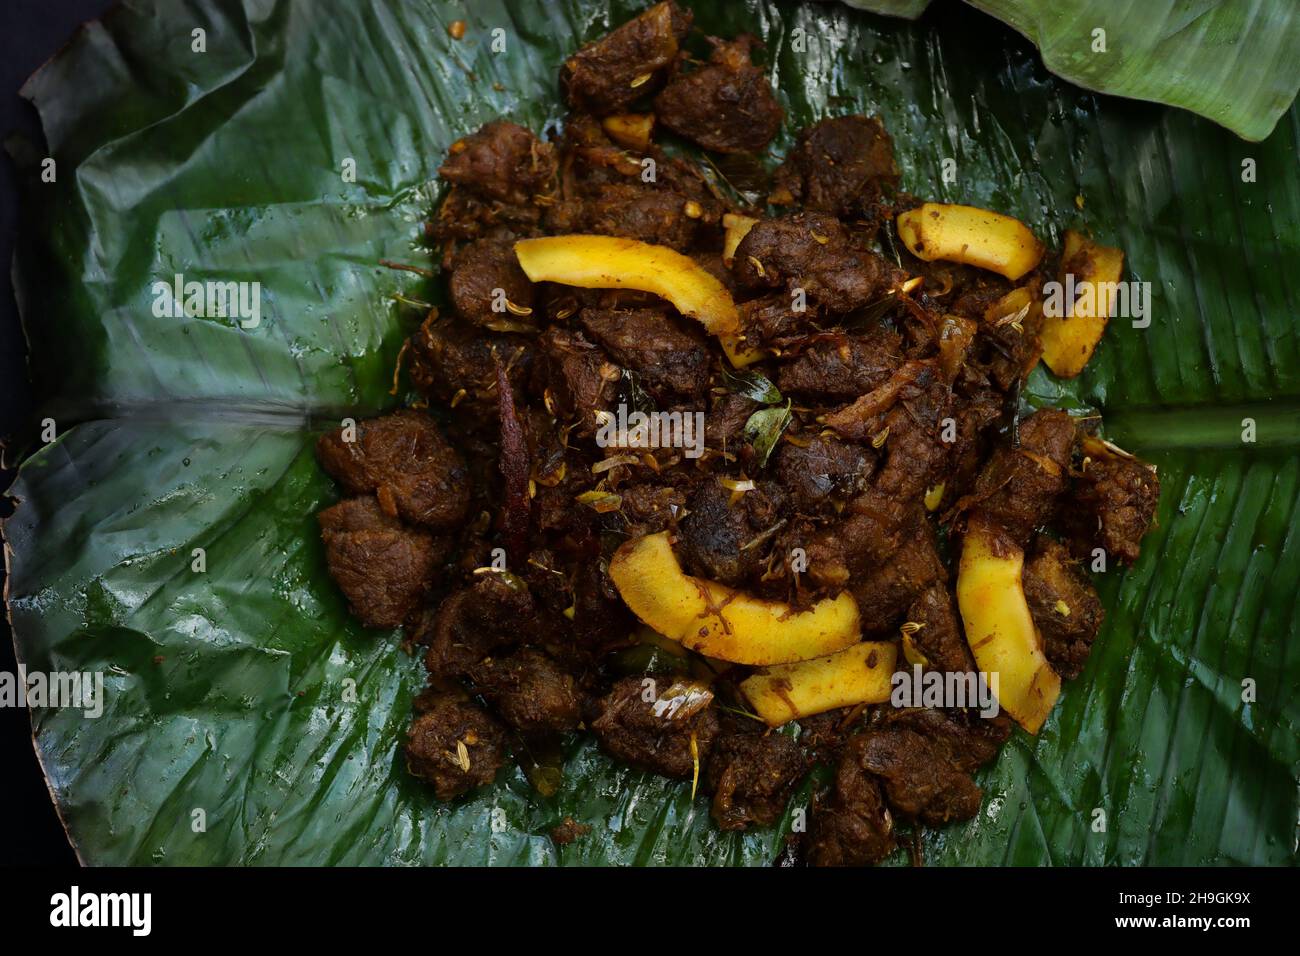 beef fry beef curry kerala style beef fry and beef curry Stock Photo